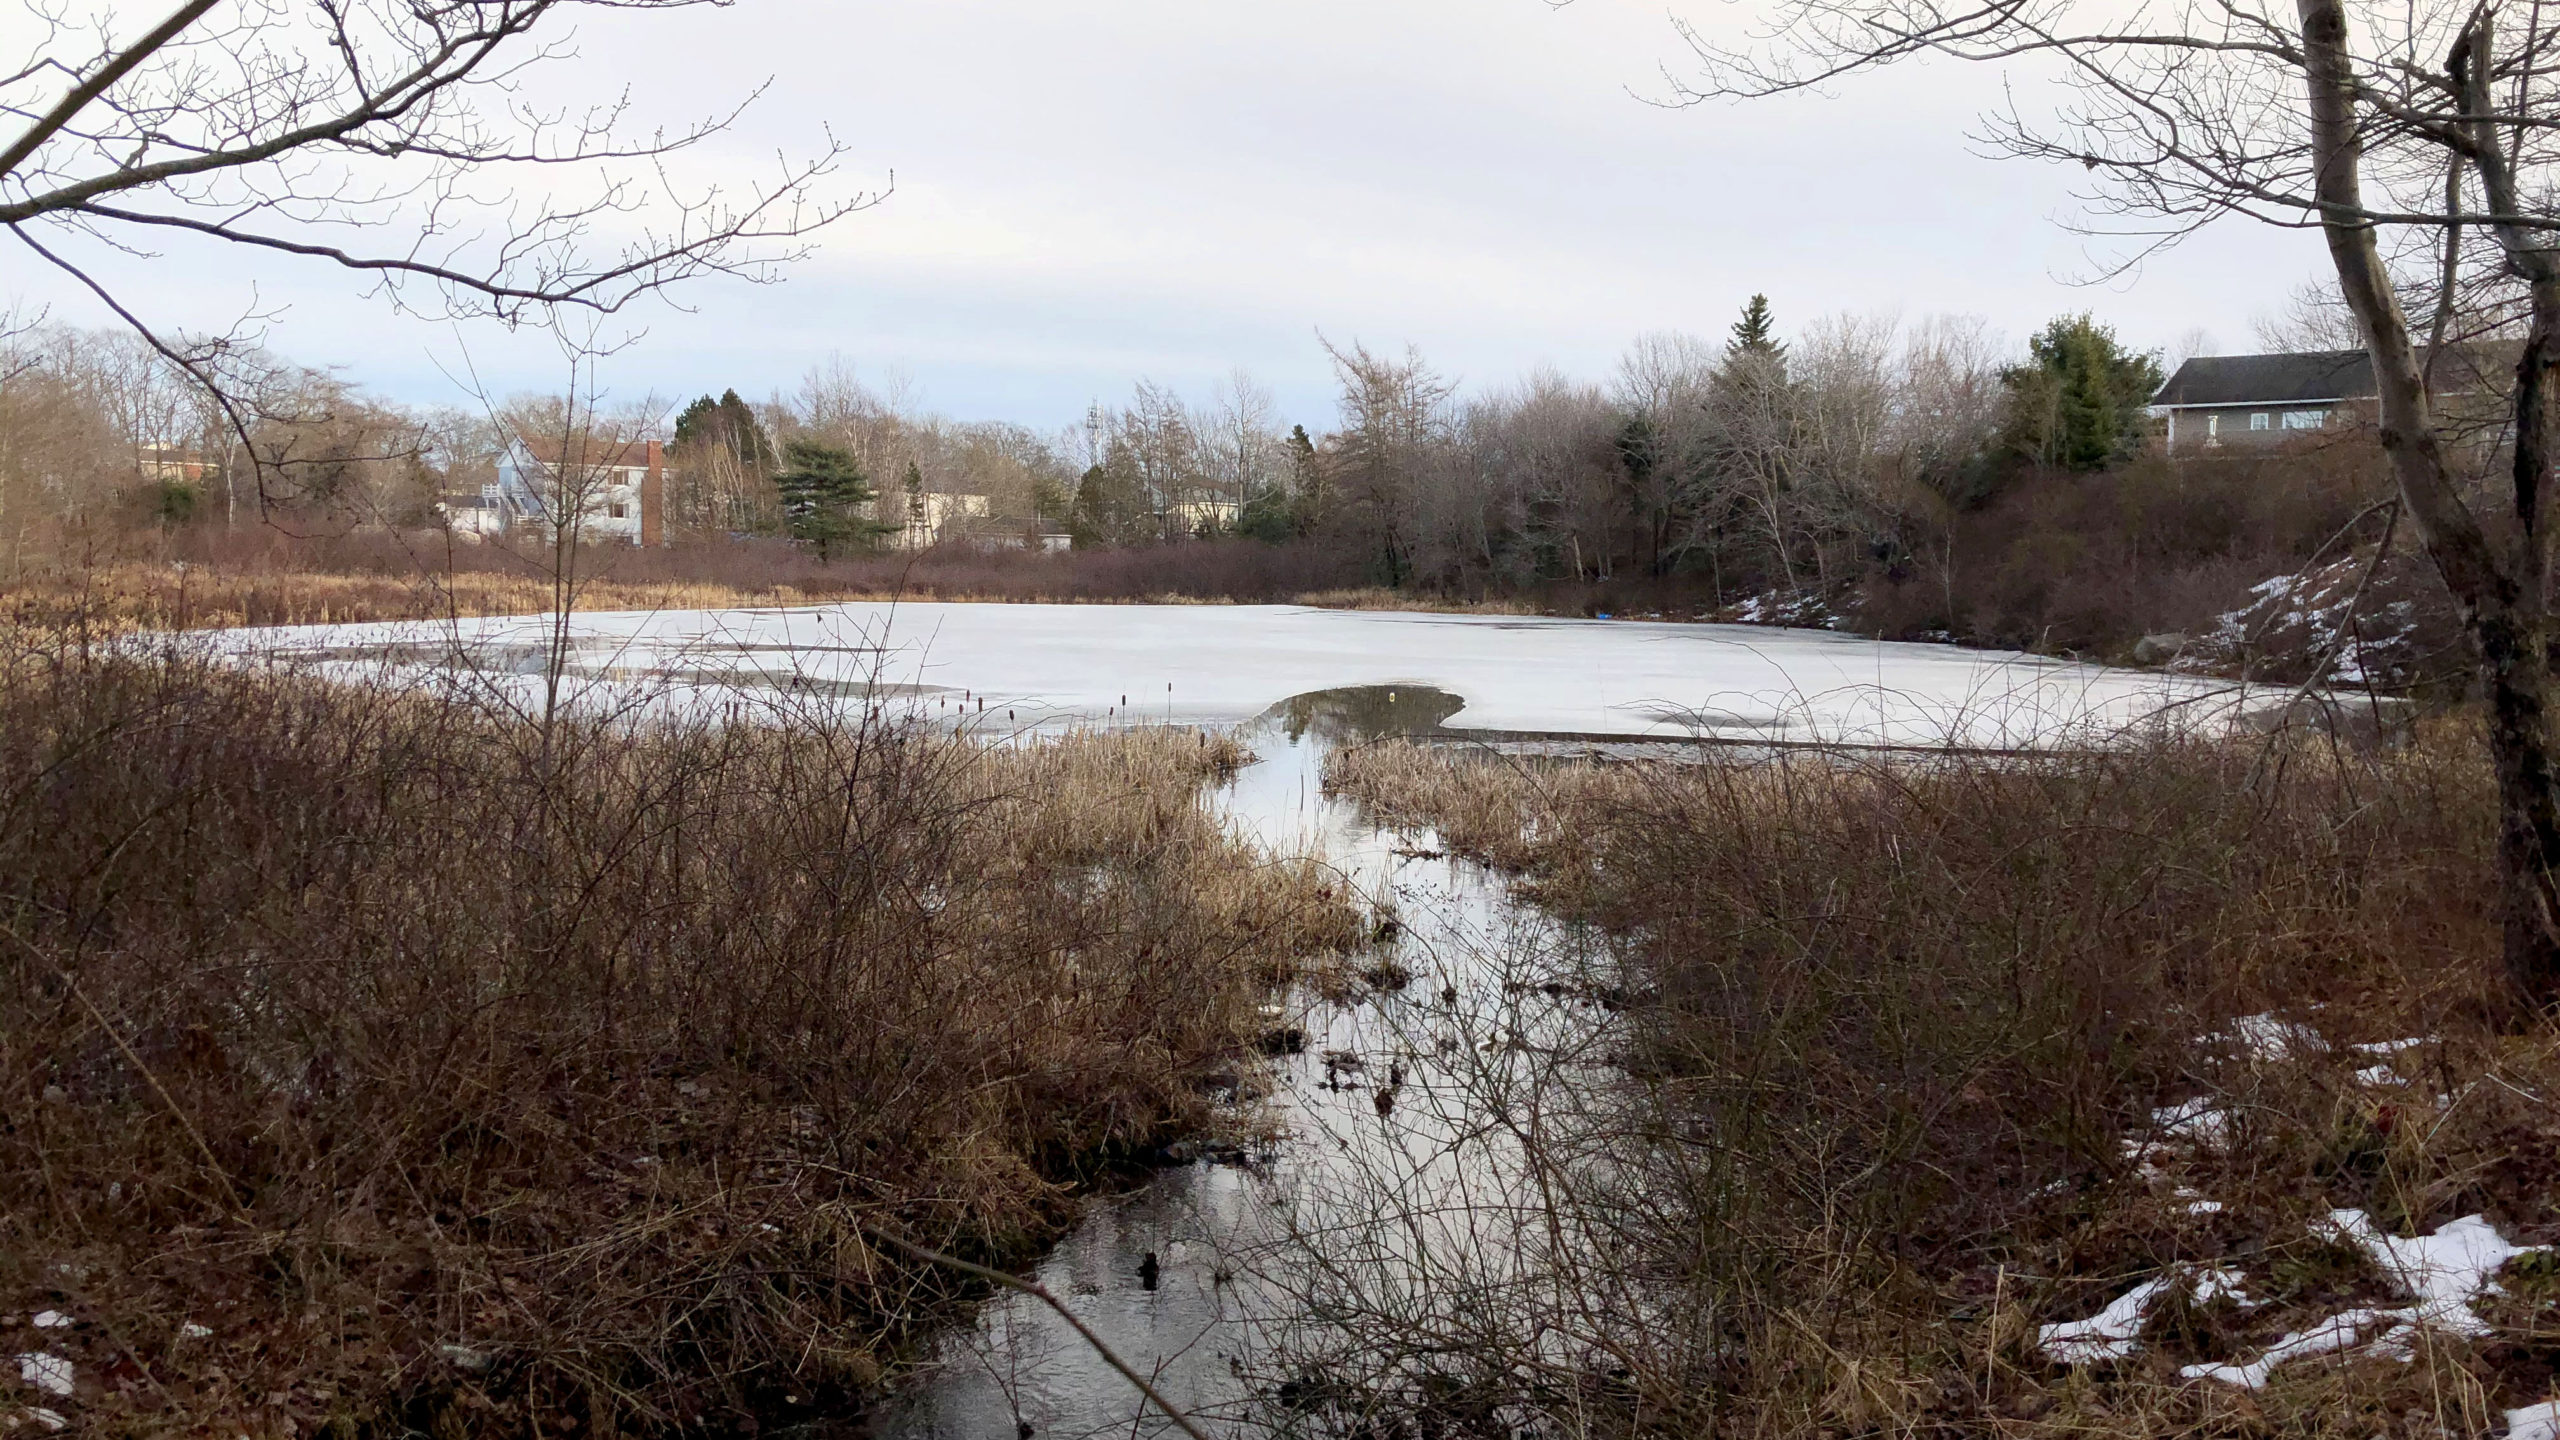 Catamaran Pond is small, but the Spryfield Defenders say development would have a big effect on the watershed.